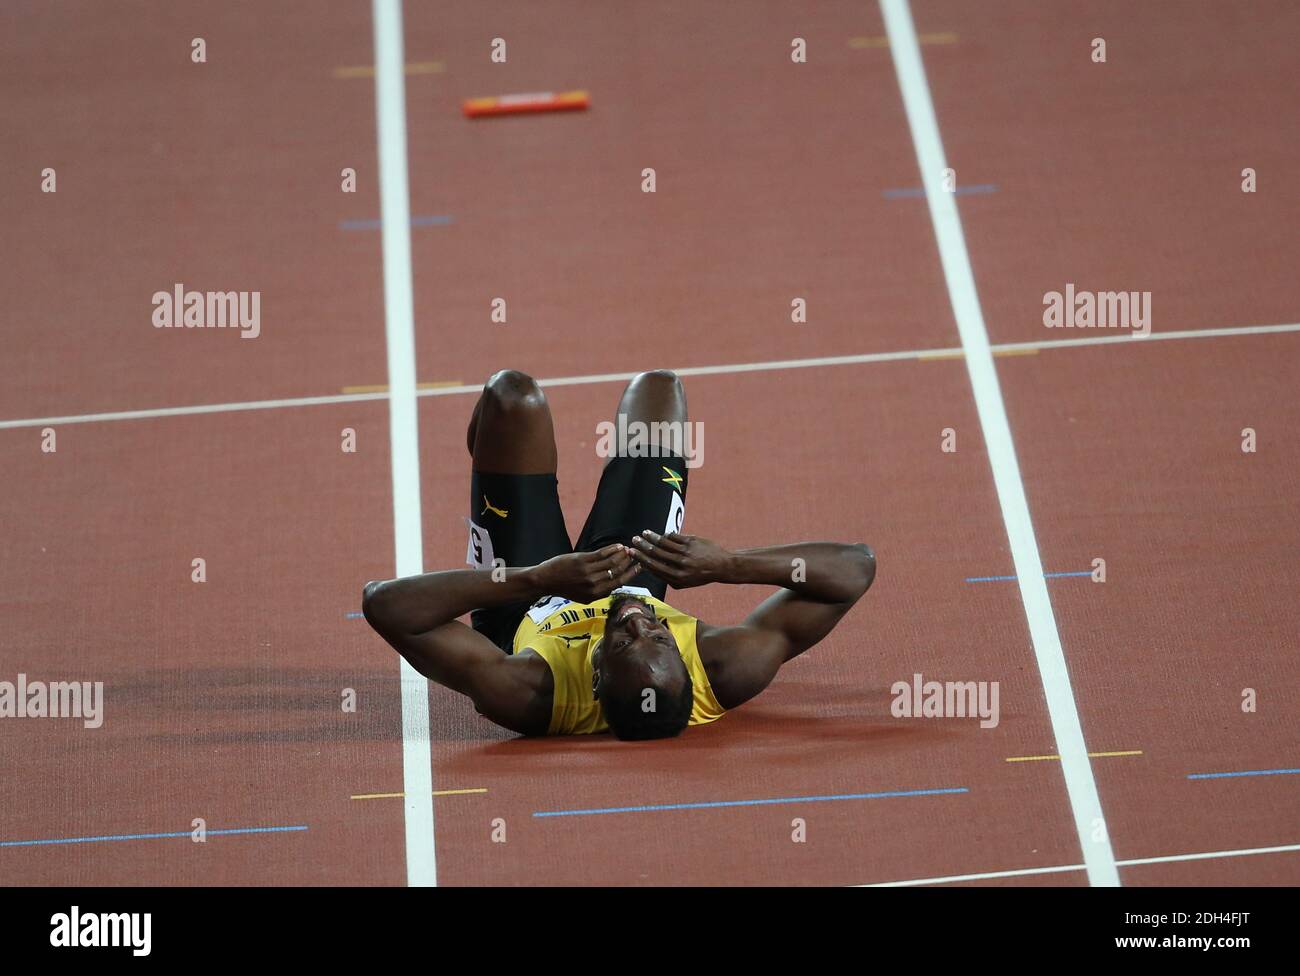 Usain Bolt of Jamaica gets injured in the lest leg of the 4x100 m. final during the day nine of the 2017 IAAF World Championships at the London Stadium in London, UK, on Saturday August 12, 2017. Photo by Giuliano Bevilacqua/ABACAPRESS.COM Stock Photo